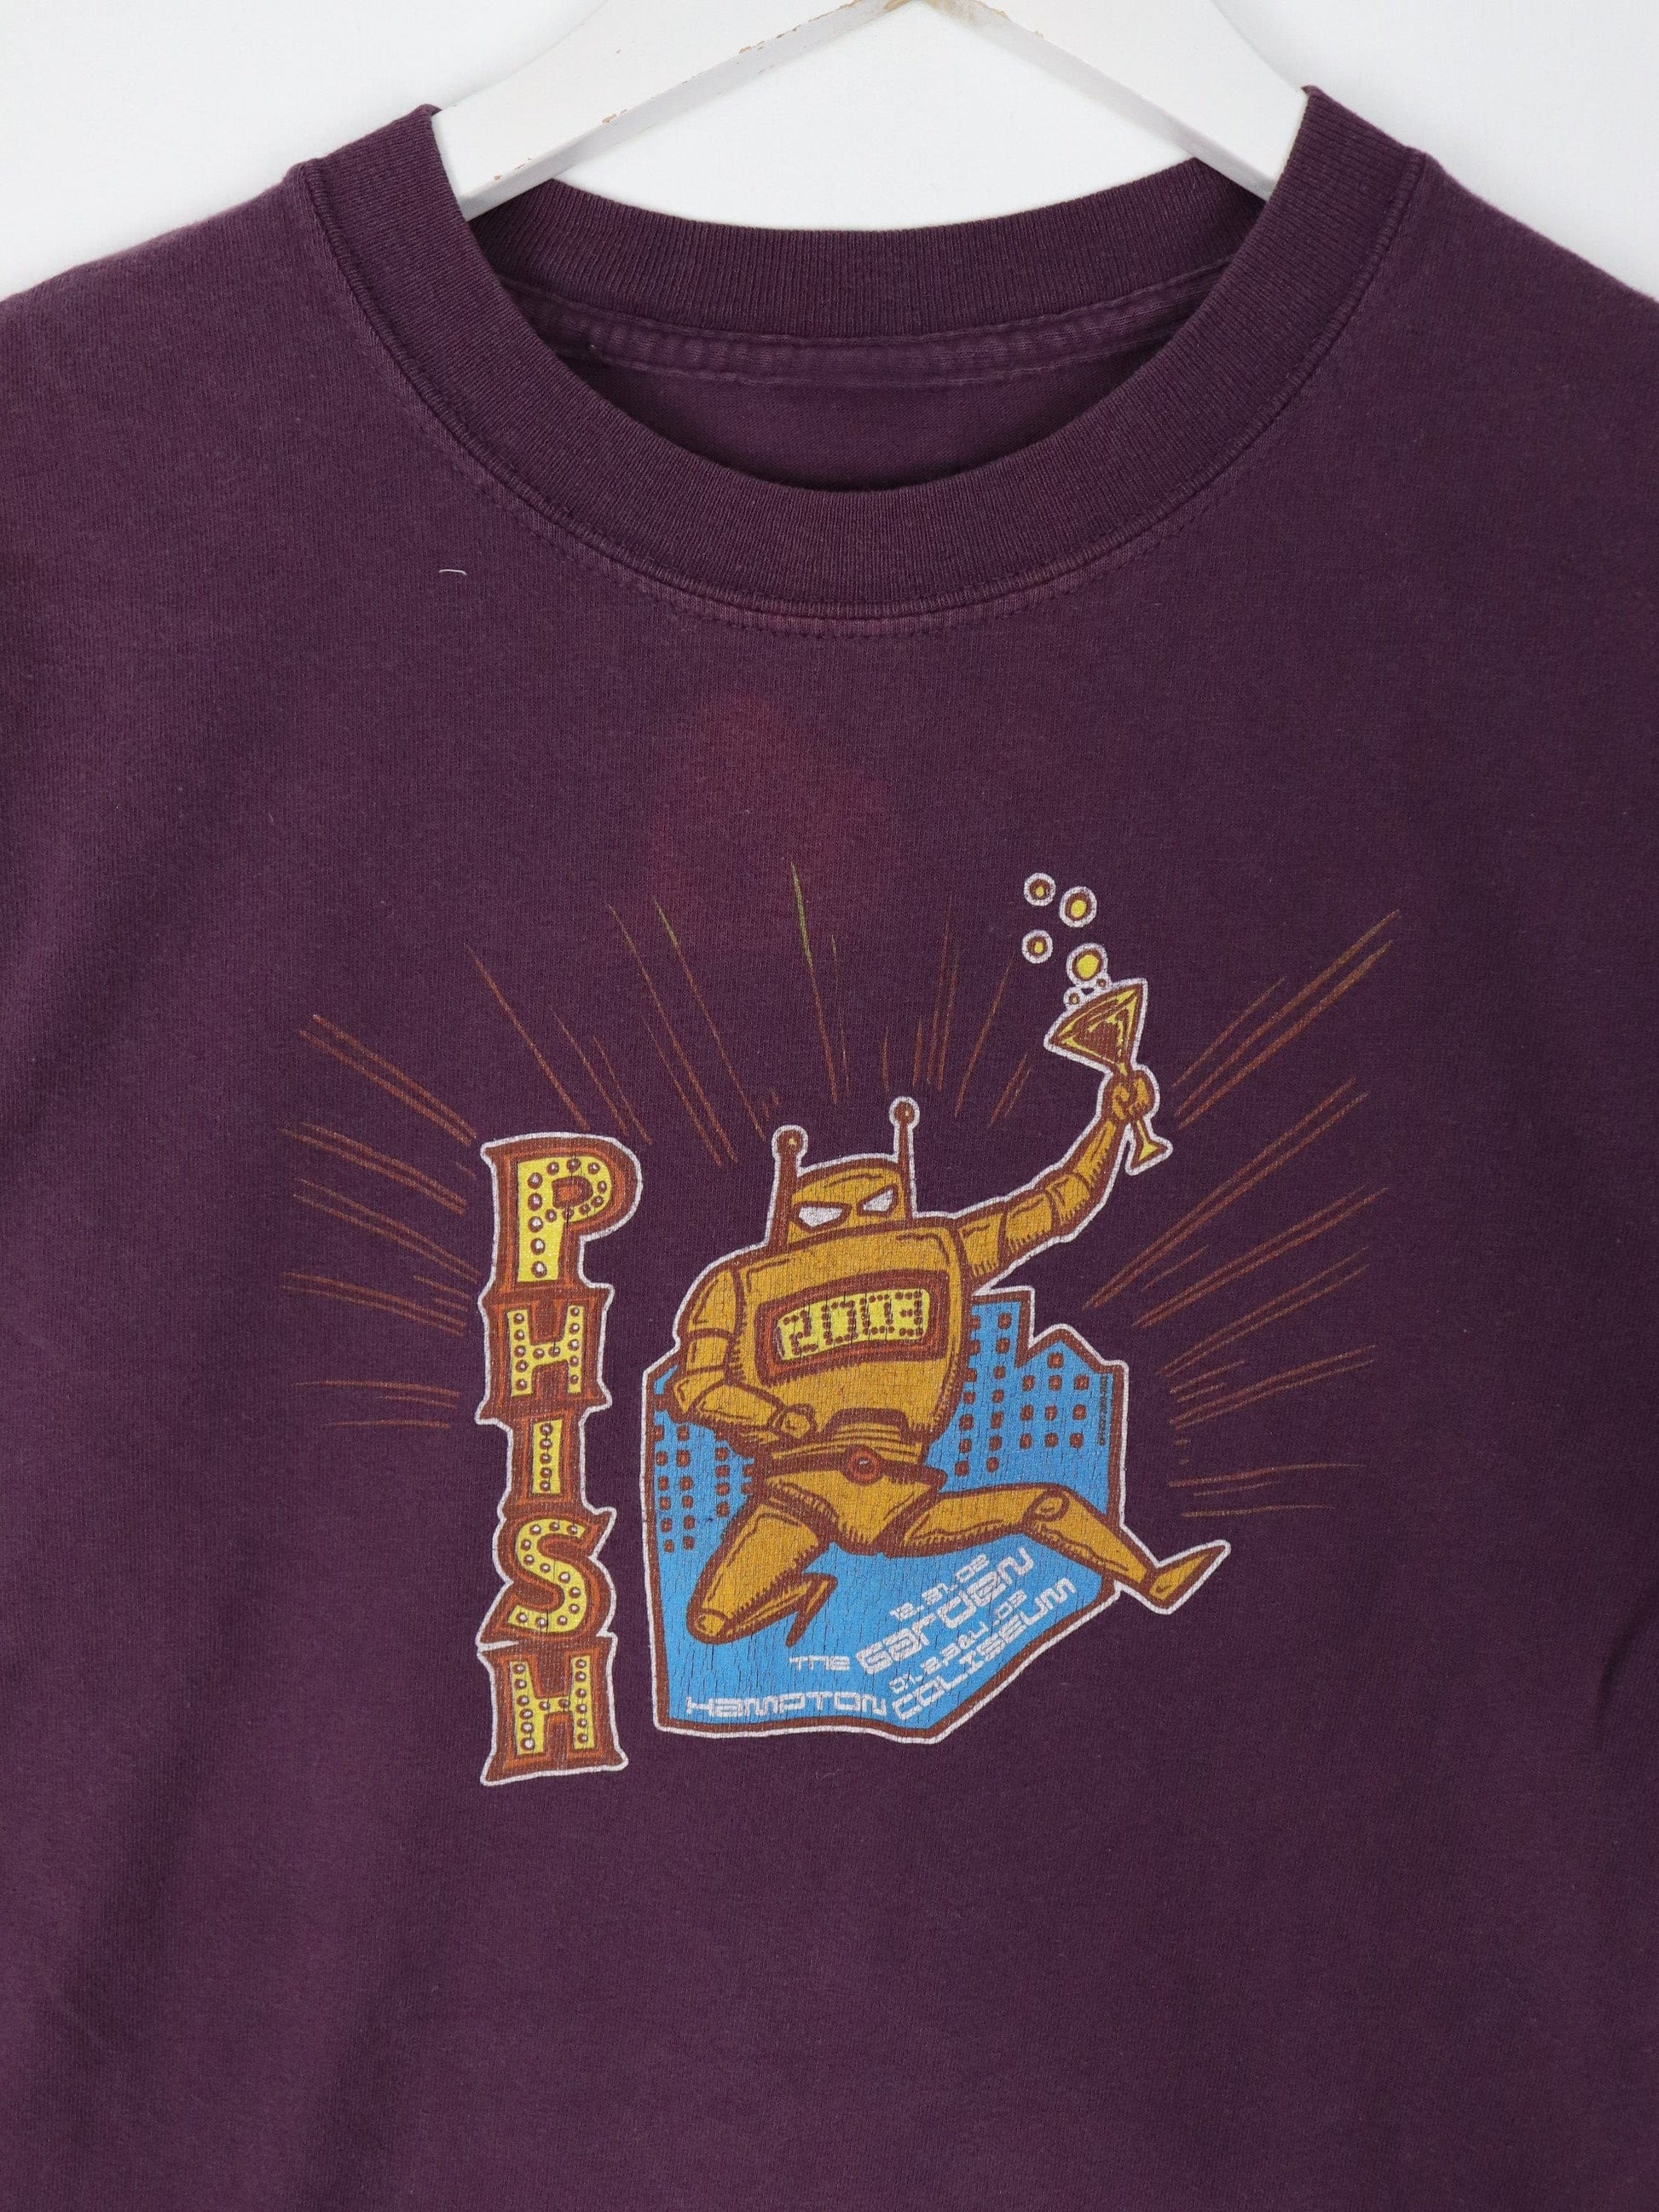 Other T-Shirts & Tank Tops Vintage Phish T Shirt Mens Small Purple 2003 Band Tour